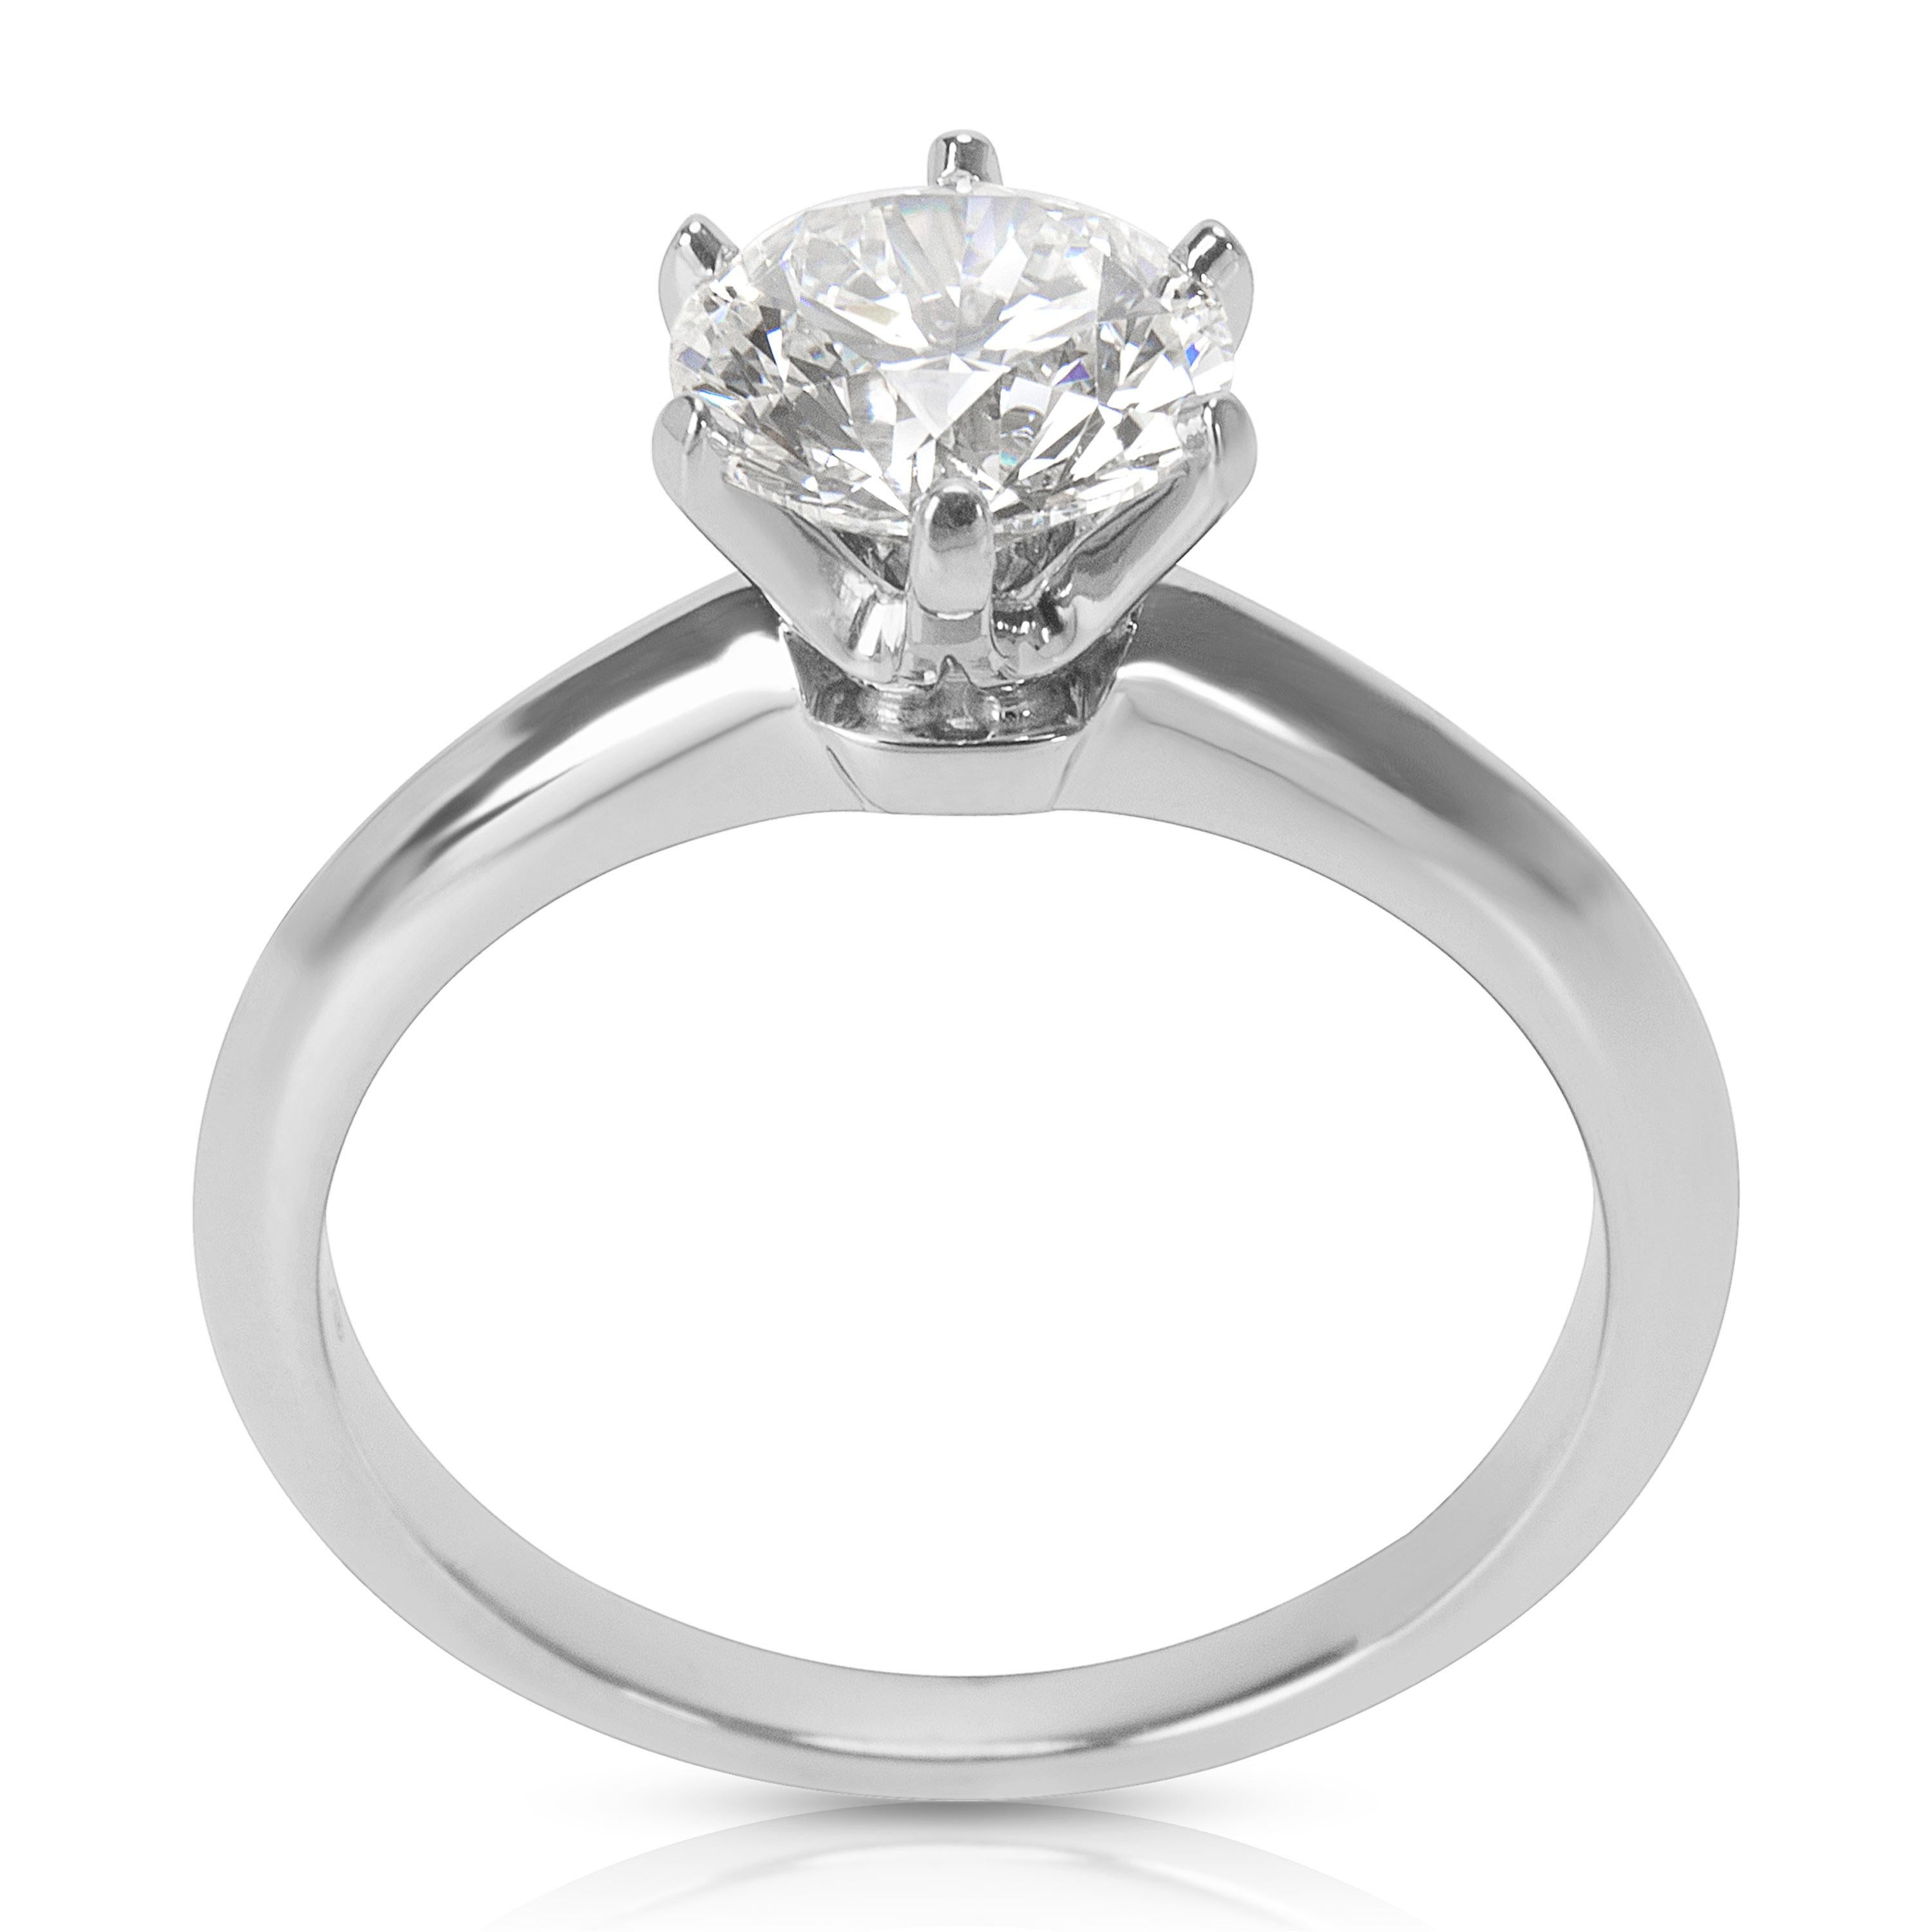 Round Cut Tiffany & Co. Solitaire Ring in Platinum with Diamonds GIA Certified 1.17 Carat